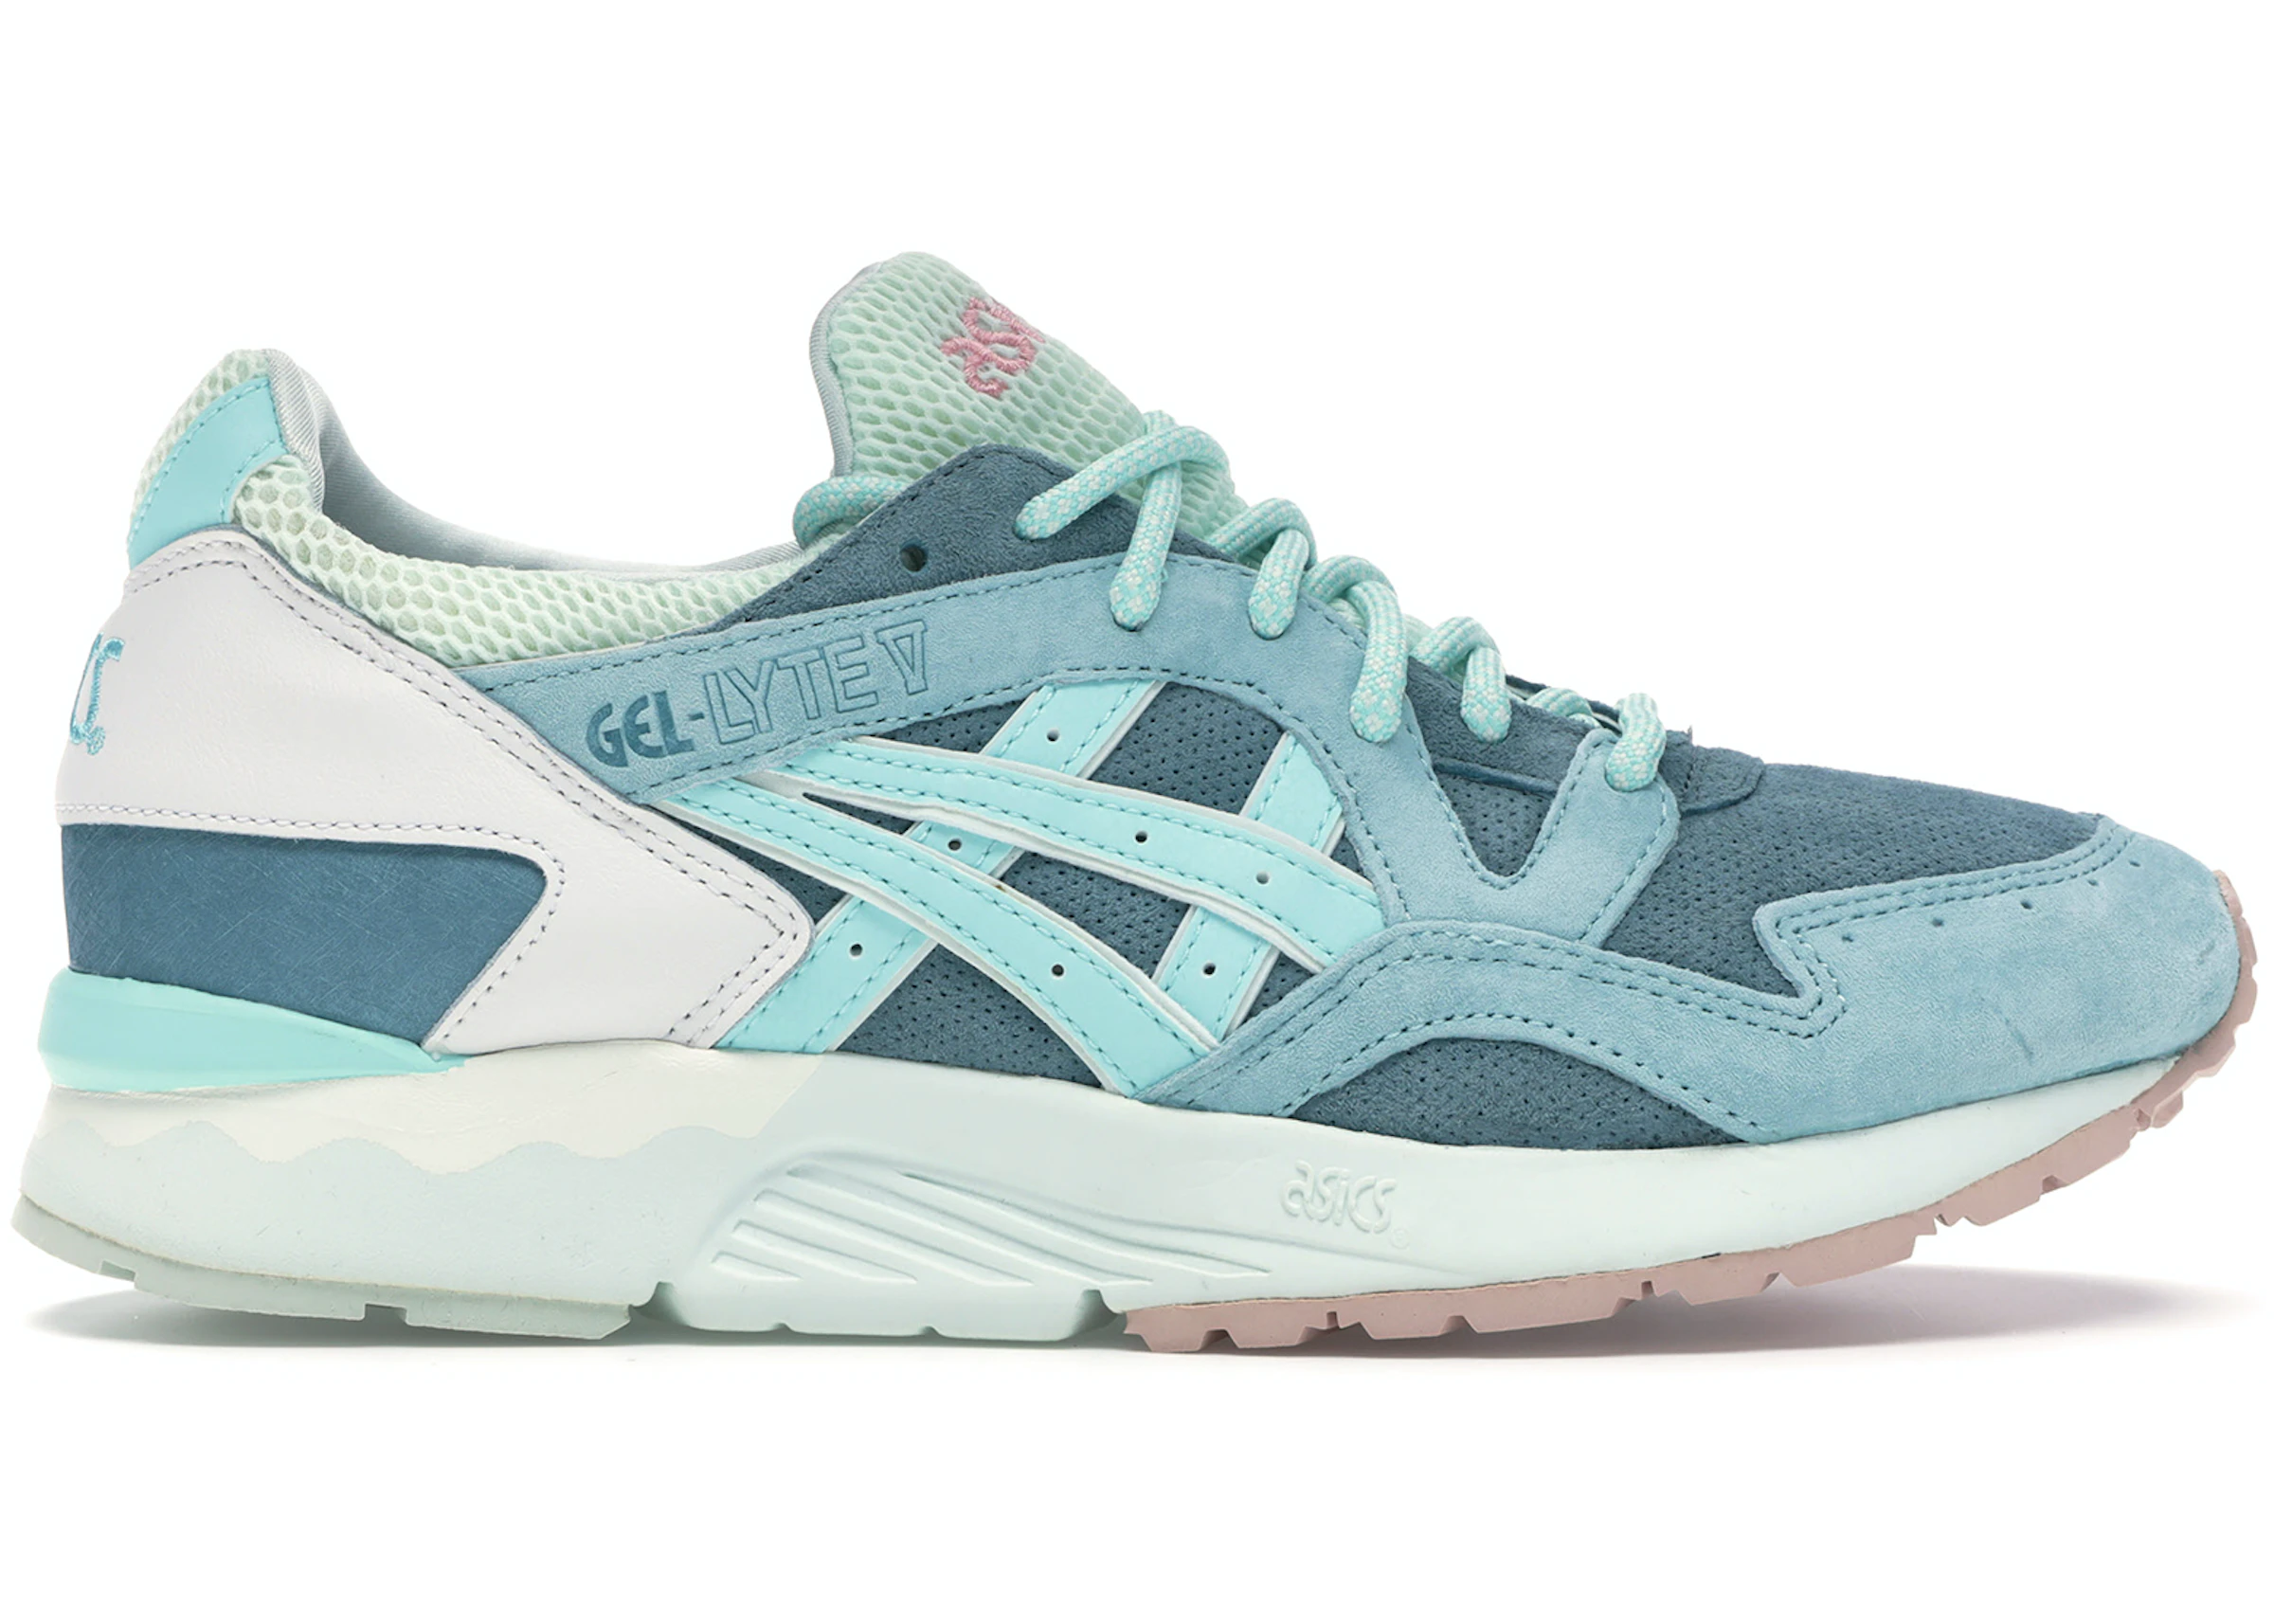 Buy ASICS Ronnie Fieg Shoes & New Sneakers - StockX